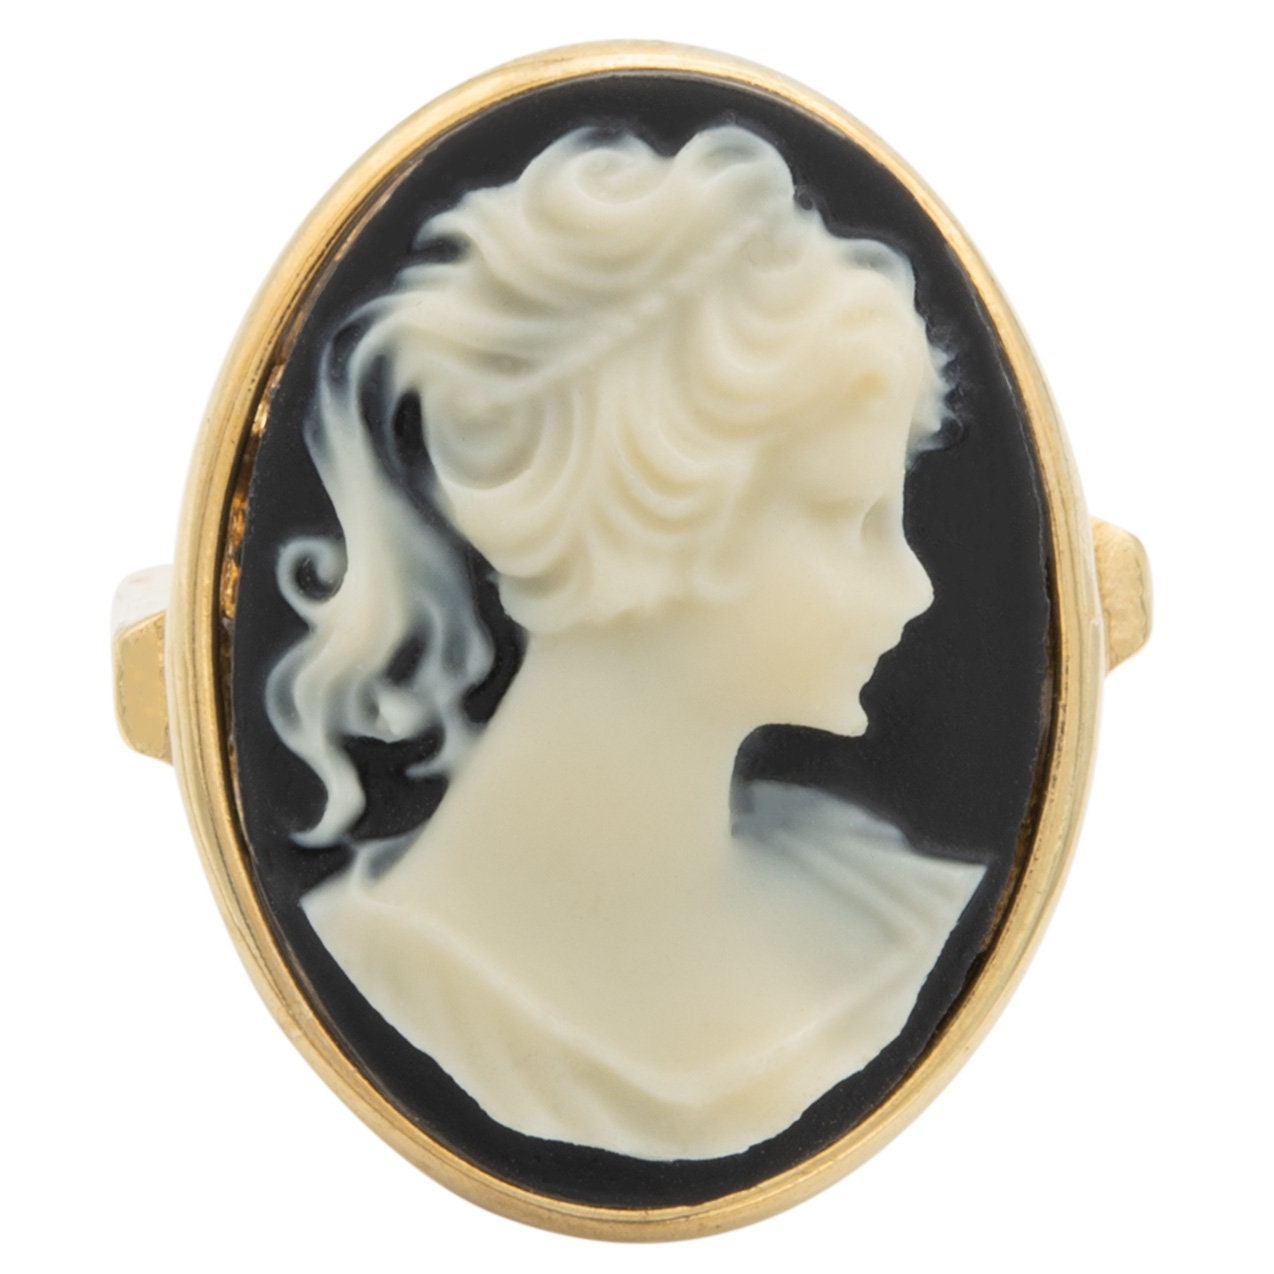 Vintage White Silhouette on Black Cameo Ring Antique 18k Gold Cameo Womans Girls Handmade Jewelry R1776 - Limited Stock - Never Worn